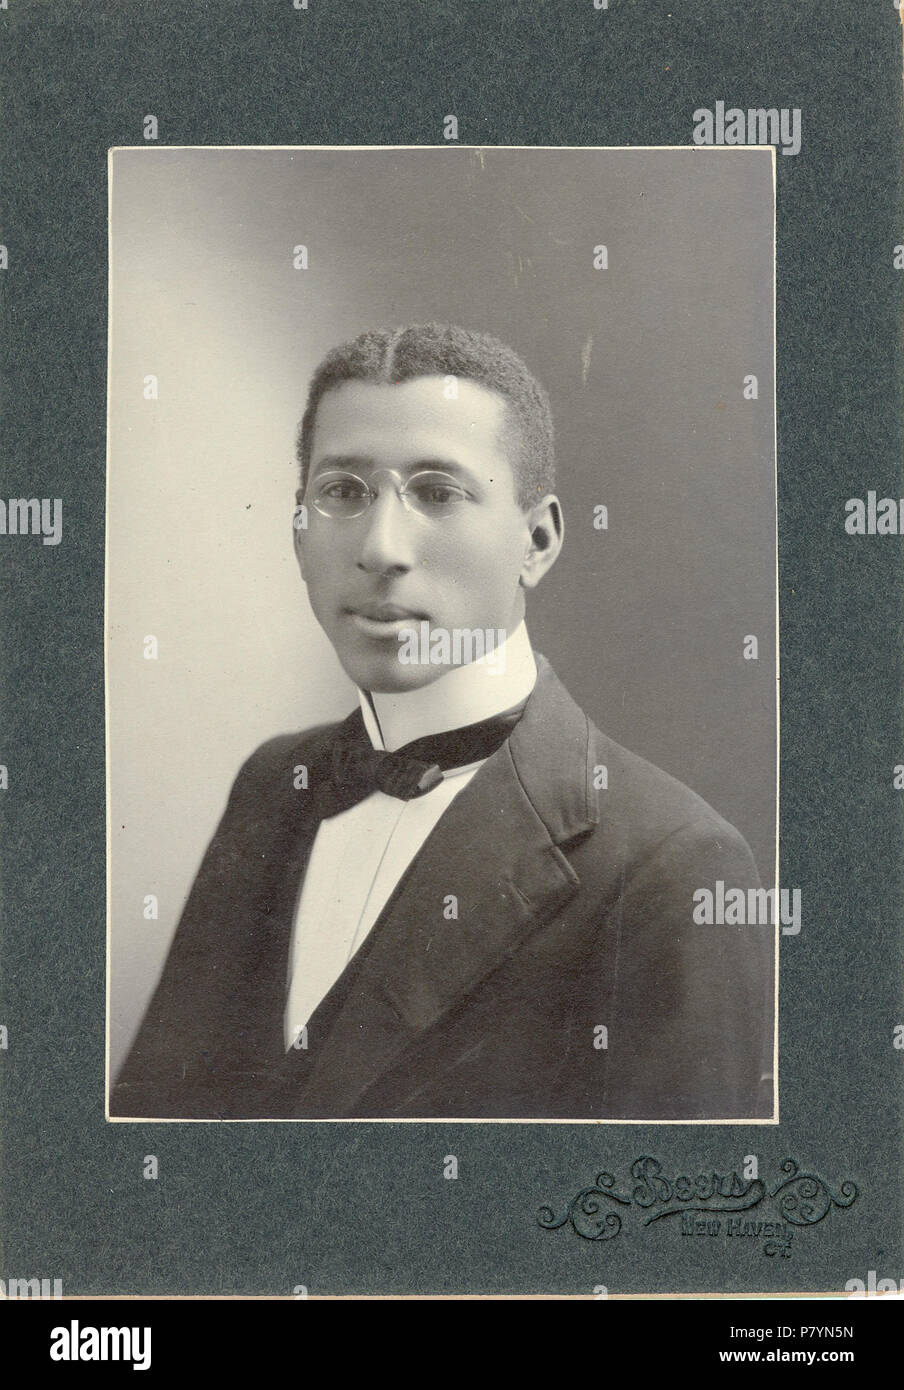 English: George Williamson Crawford, a student at Yale University Law School at the time of this photograph. circa 1900 171 George Williamson Crawford Stock Photo